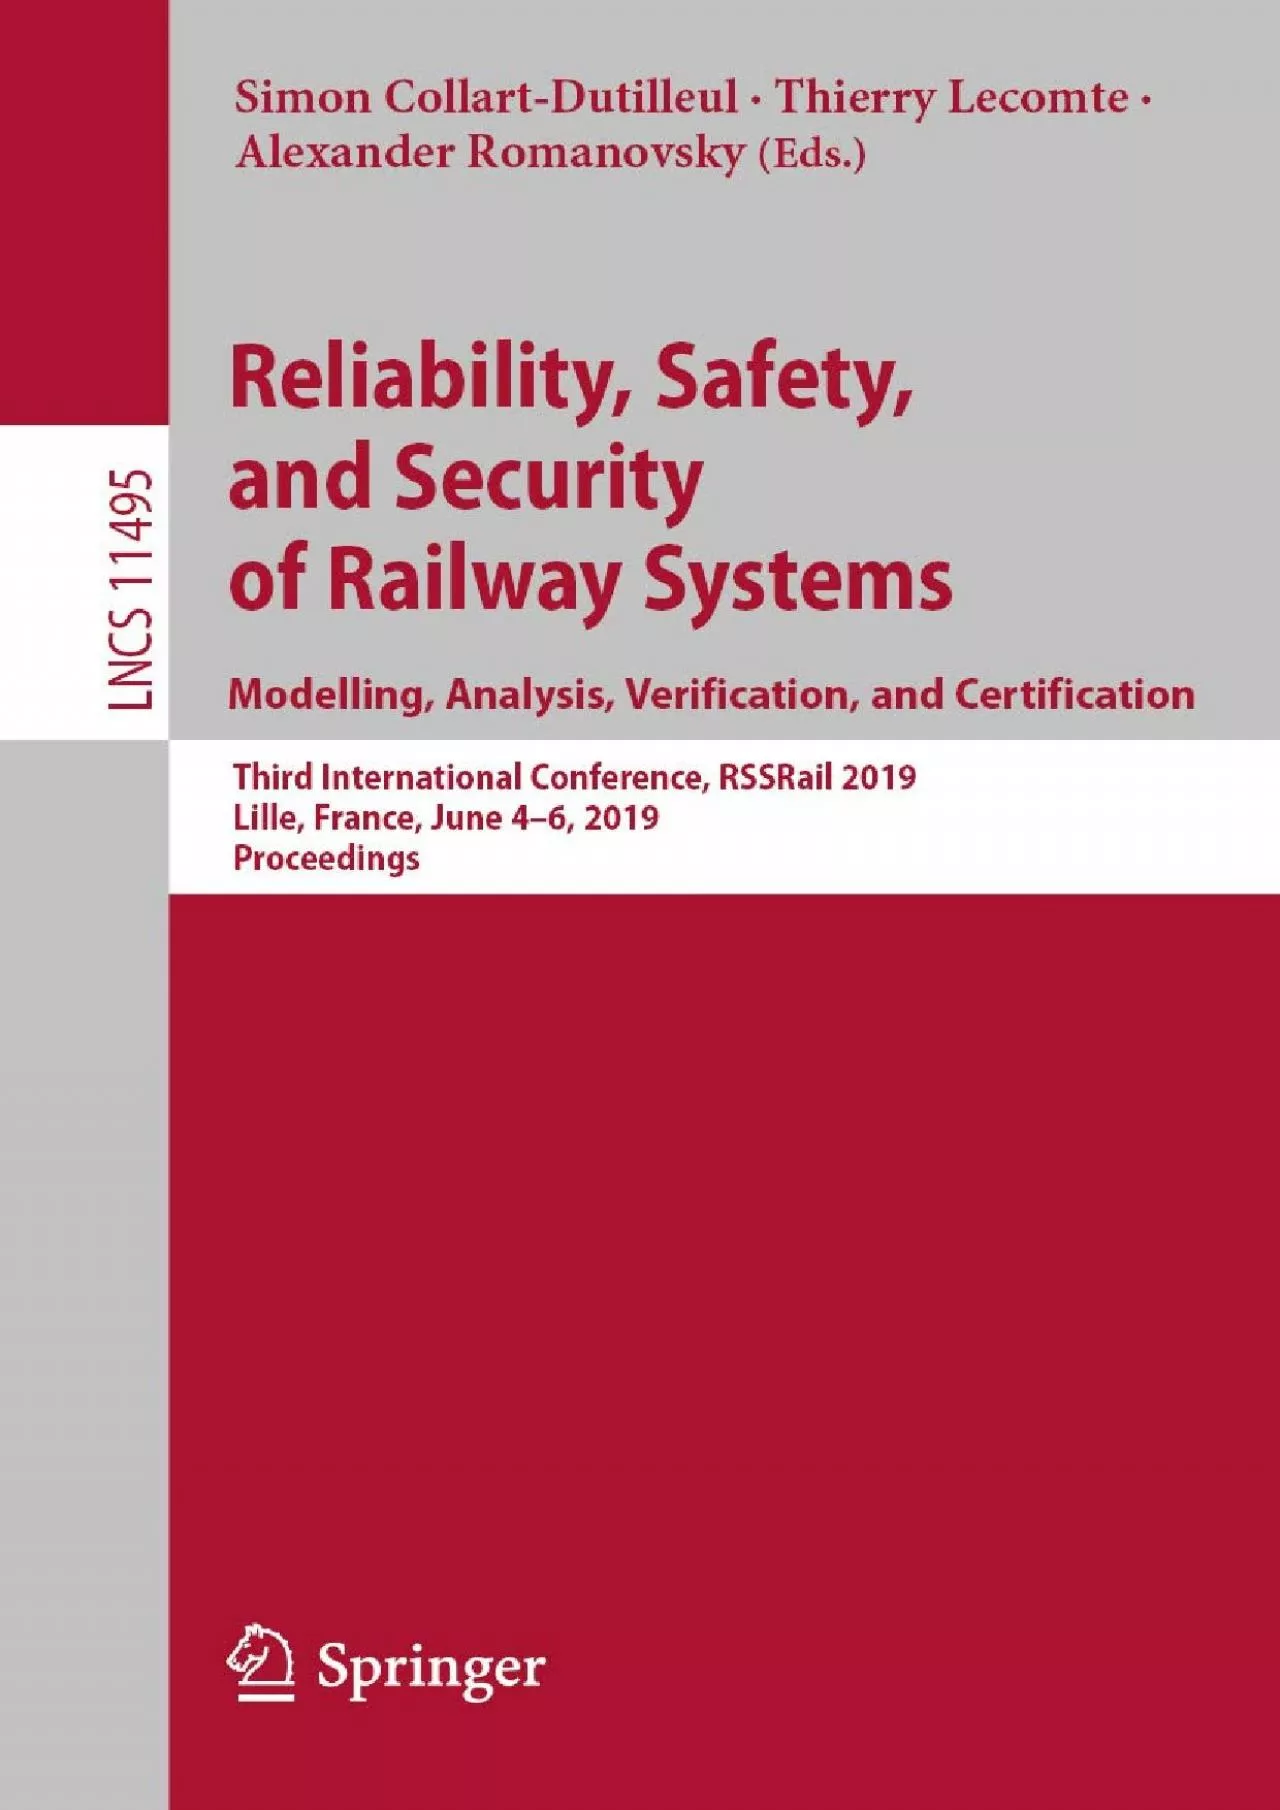 [PDF]-Reliability, Safety, and Security of Railway Systems. Modelling, Analysis, Verification,